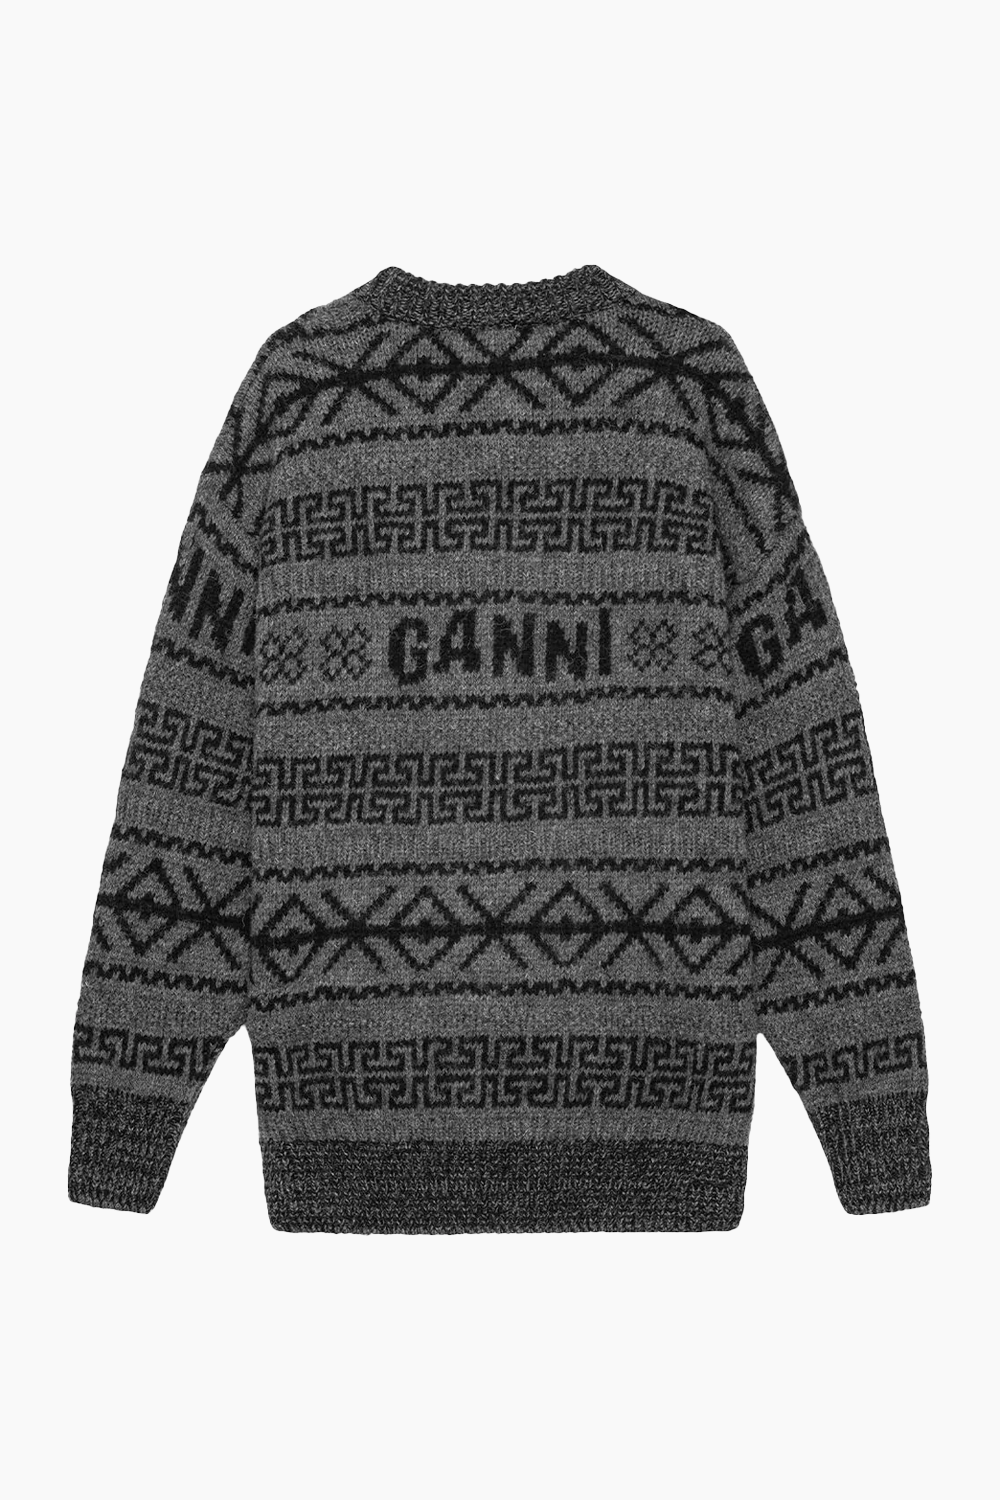 Lambswool Pullover K2174 - Charcoal Grey - GANNI